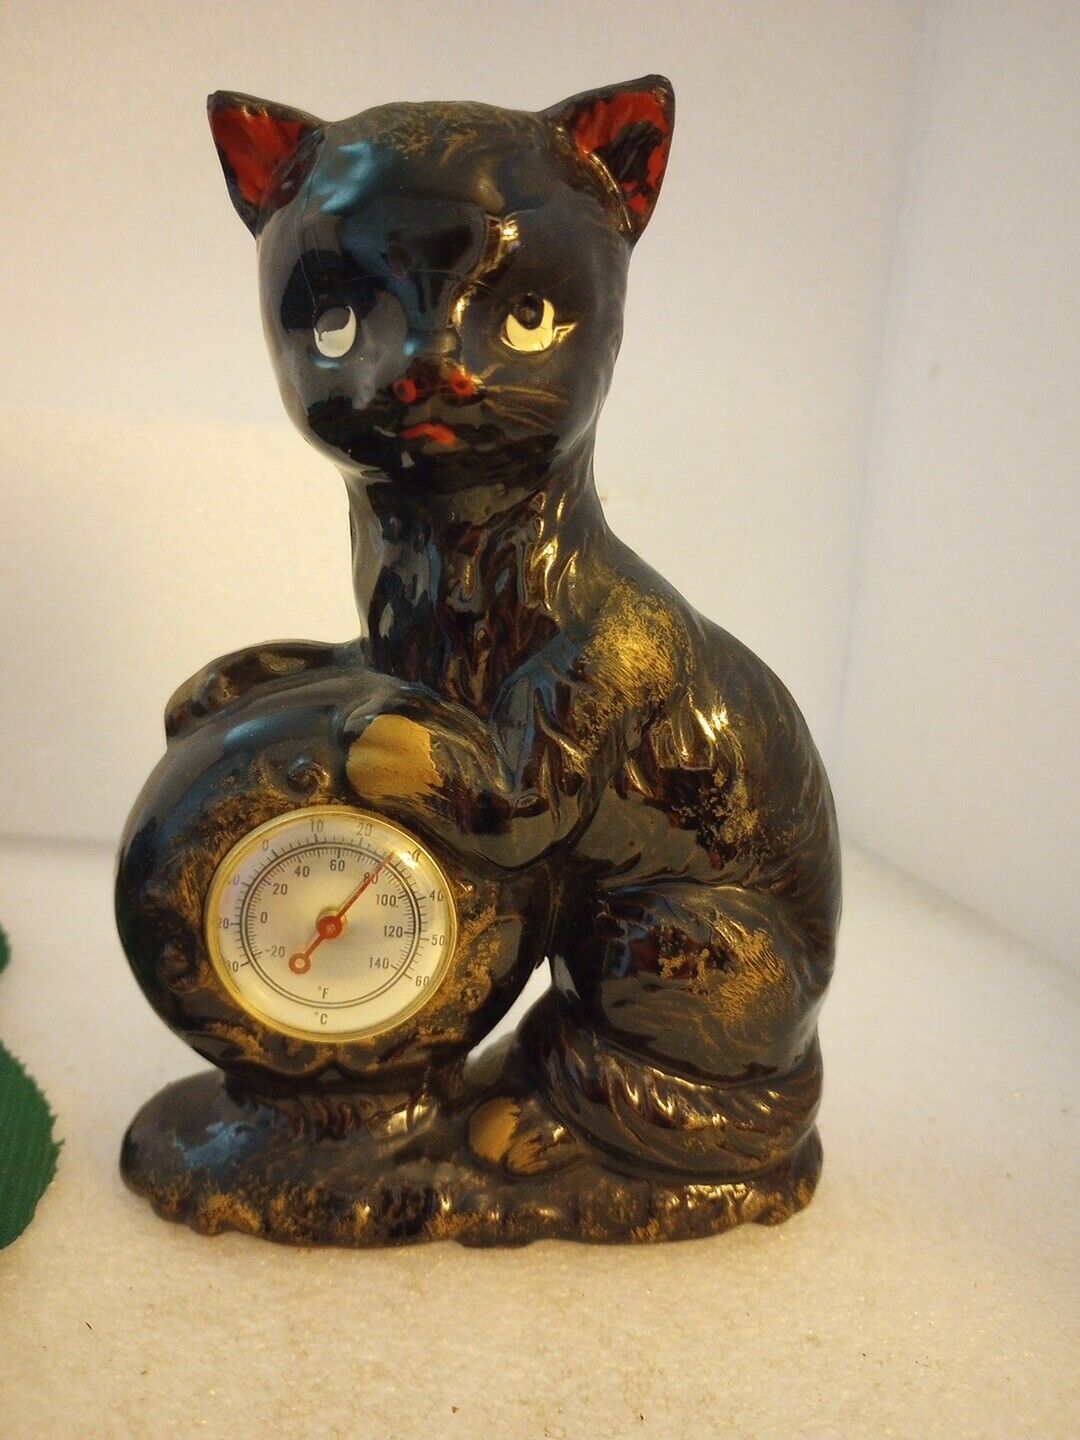 Vtg BLACK CAT CERAMIC  FIGURINE WITH THERMOMETER MADE IN JAPAN